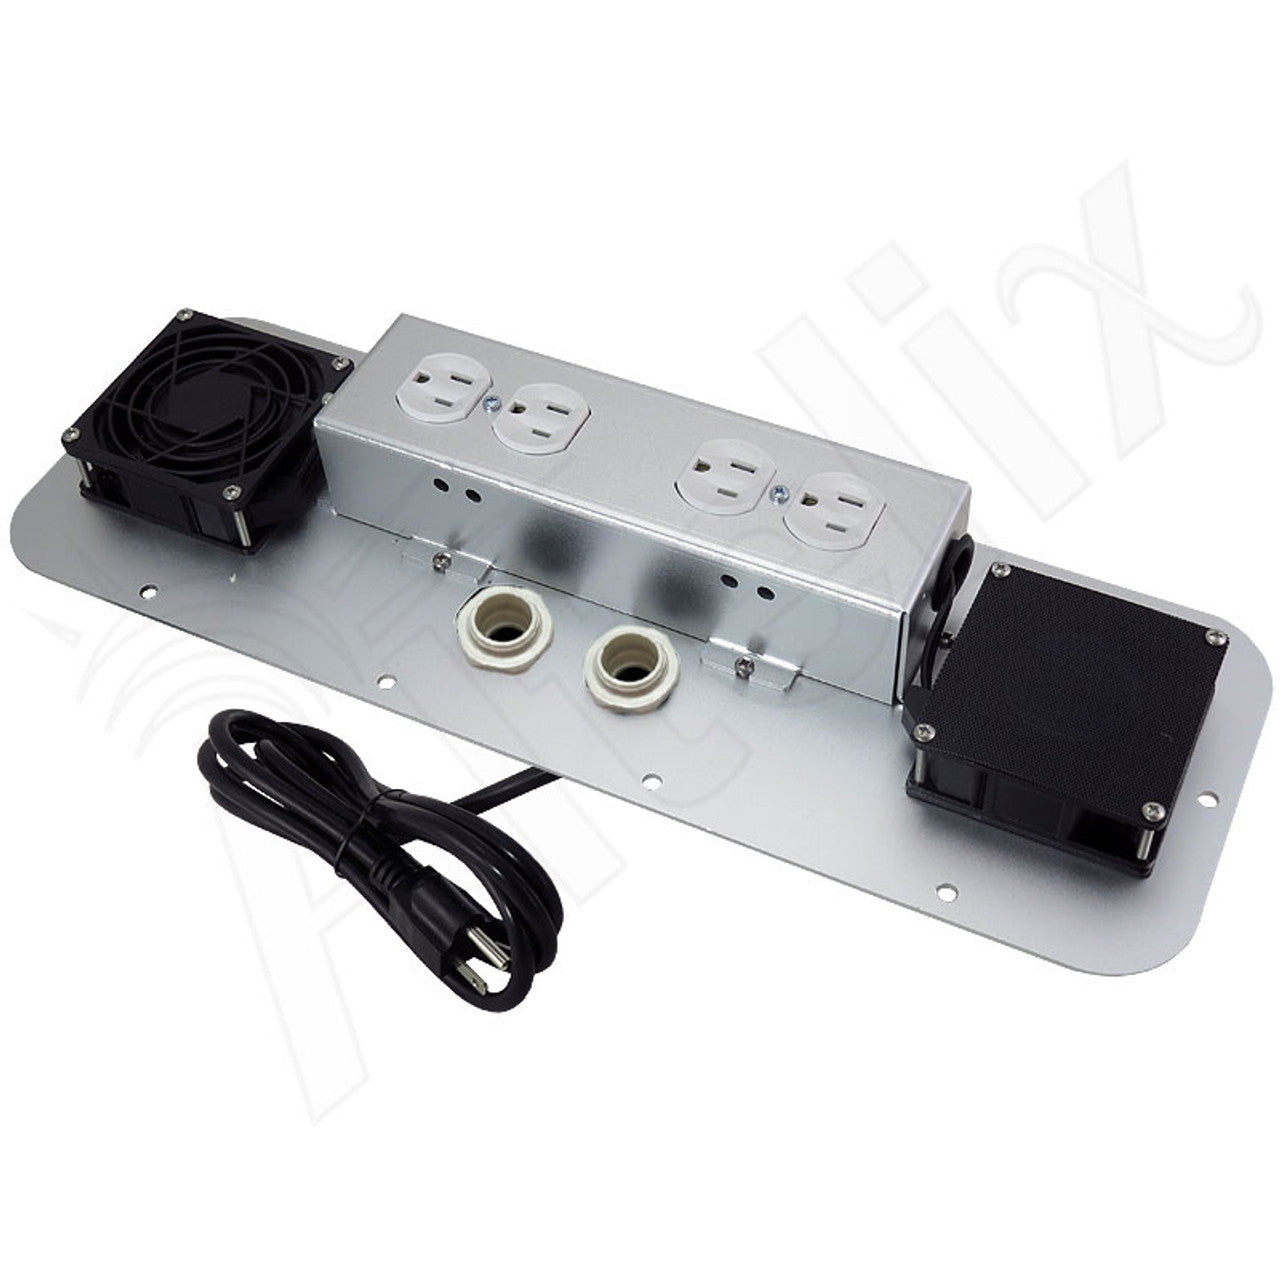 Power Module with 120VAC Outlets and Cooling Fan for NS242012, NS242412, NX242416, NS242416, NS242424, NS282416 and NS322416 Enclosures